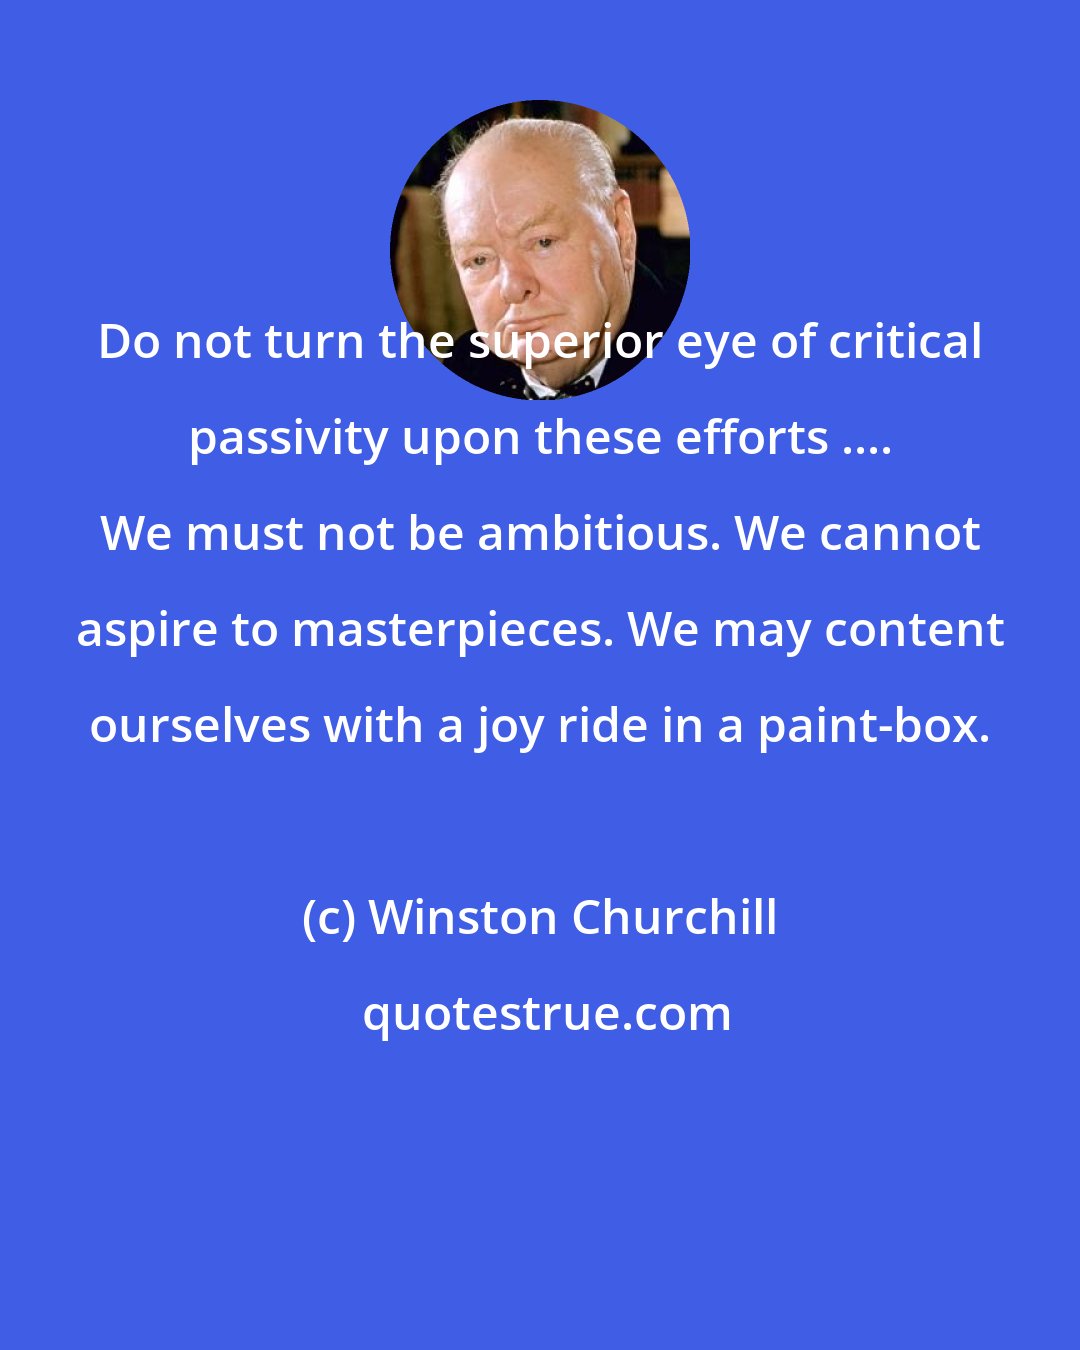 Winston Churchill: Do not turn the superior eye of critical passivity upon these efforts .... We must not be ambitious. We cannot aspire to masterpieces. We may content ourselves with a joy ride in a paint-box.